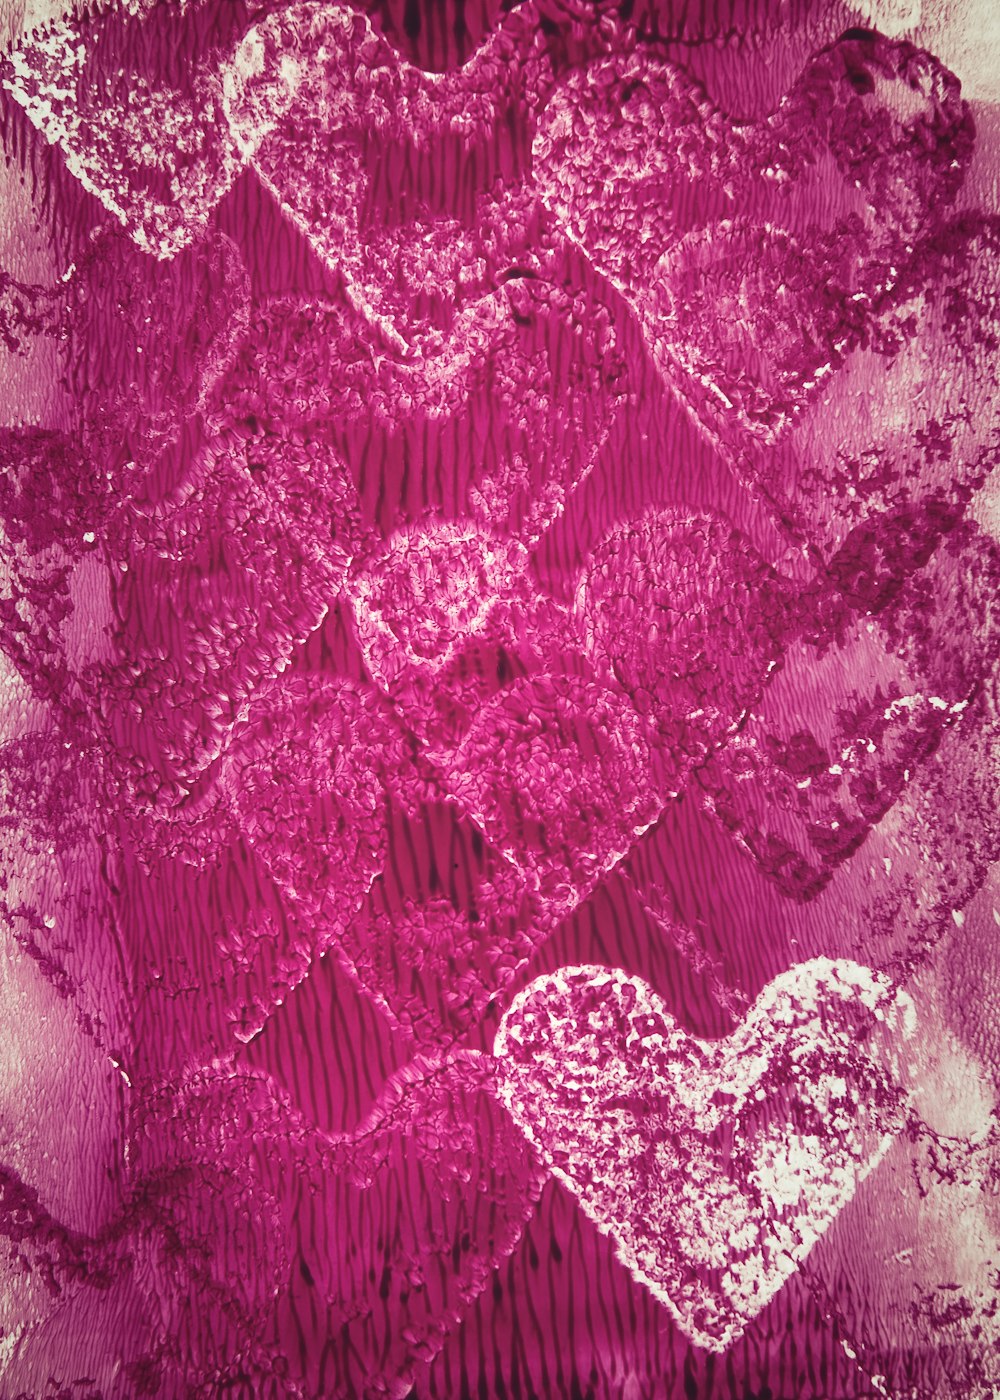 two hearts are shown on a pink background